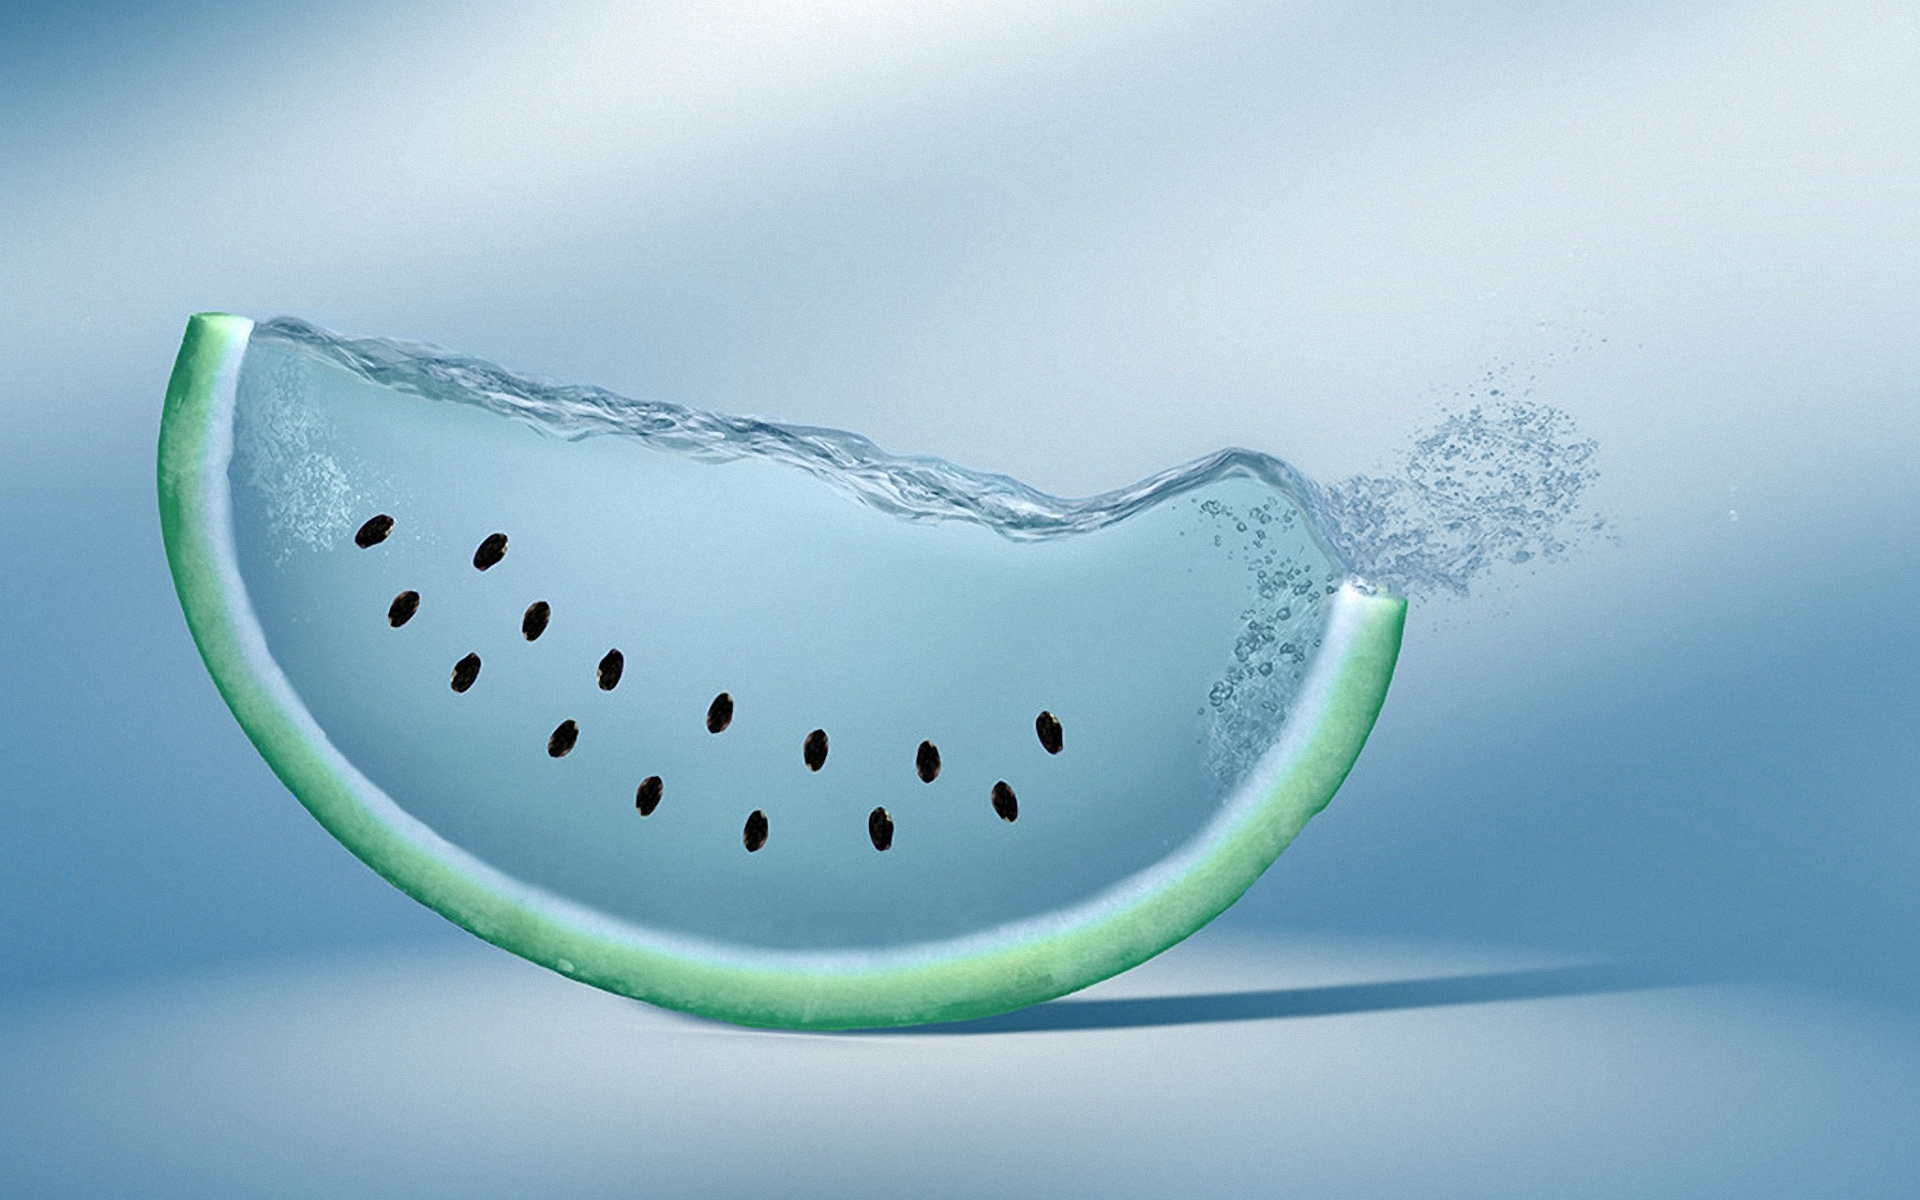 Download Blue Watermelon Cool 3D Wallpaper in HD Quality